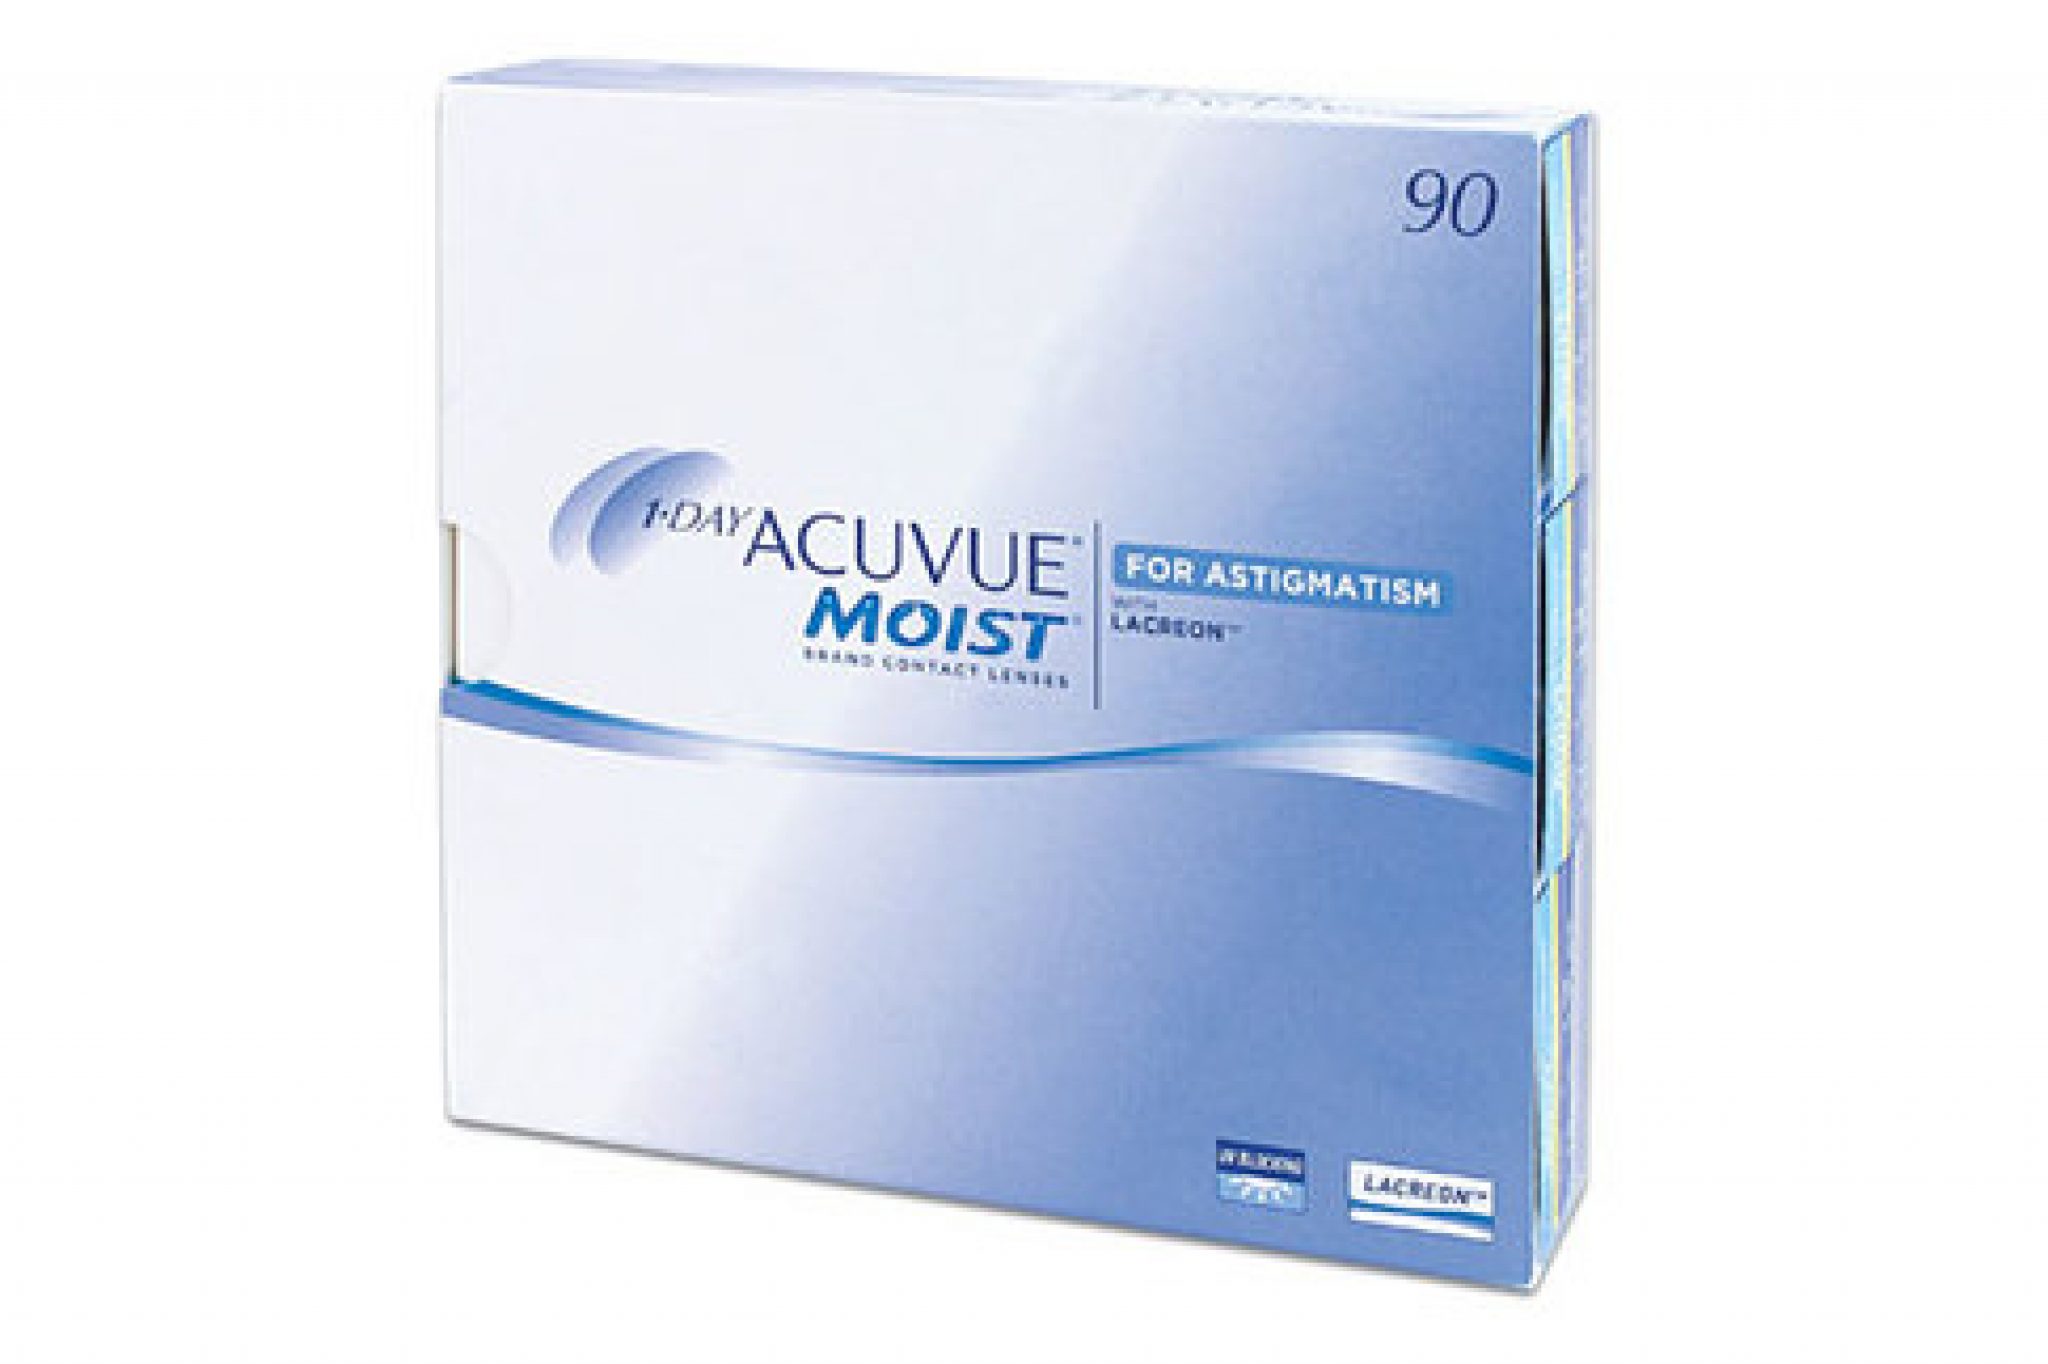 1-day-acuvue-moist-for-astigmatism-contact-lens-price-comparison-australia